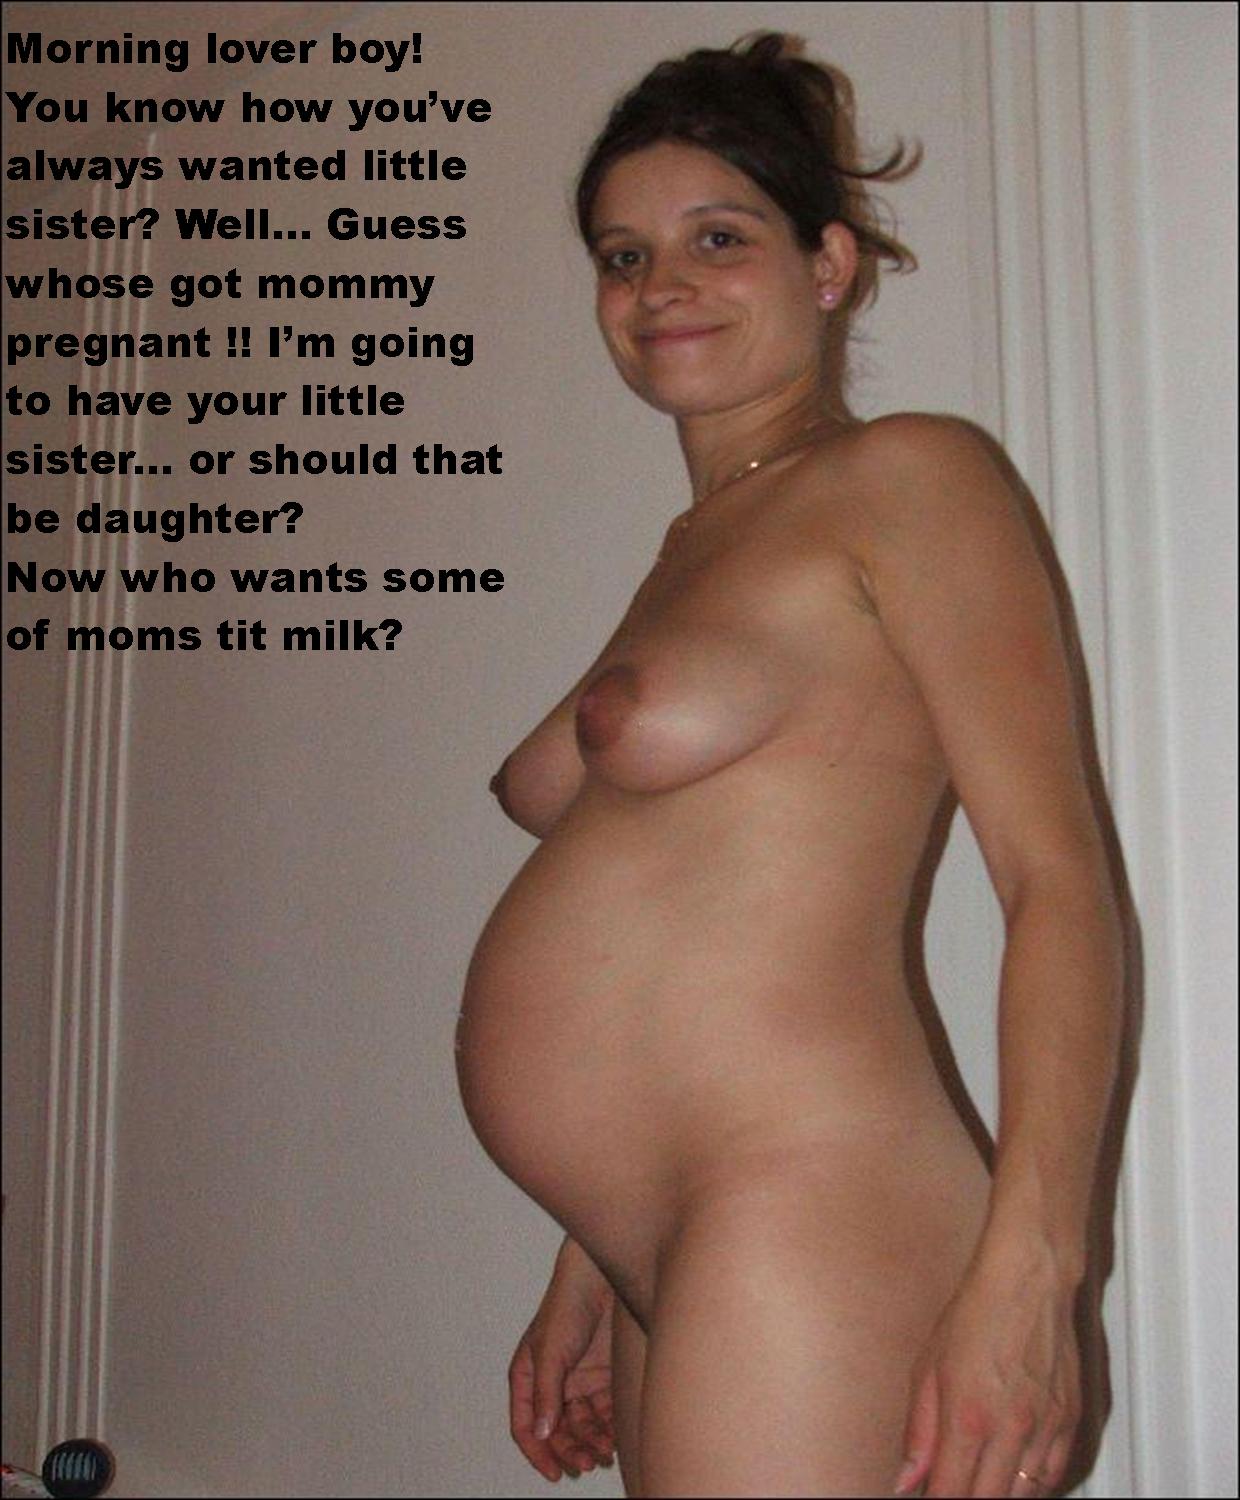 Got my daughter pregnant